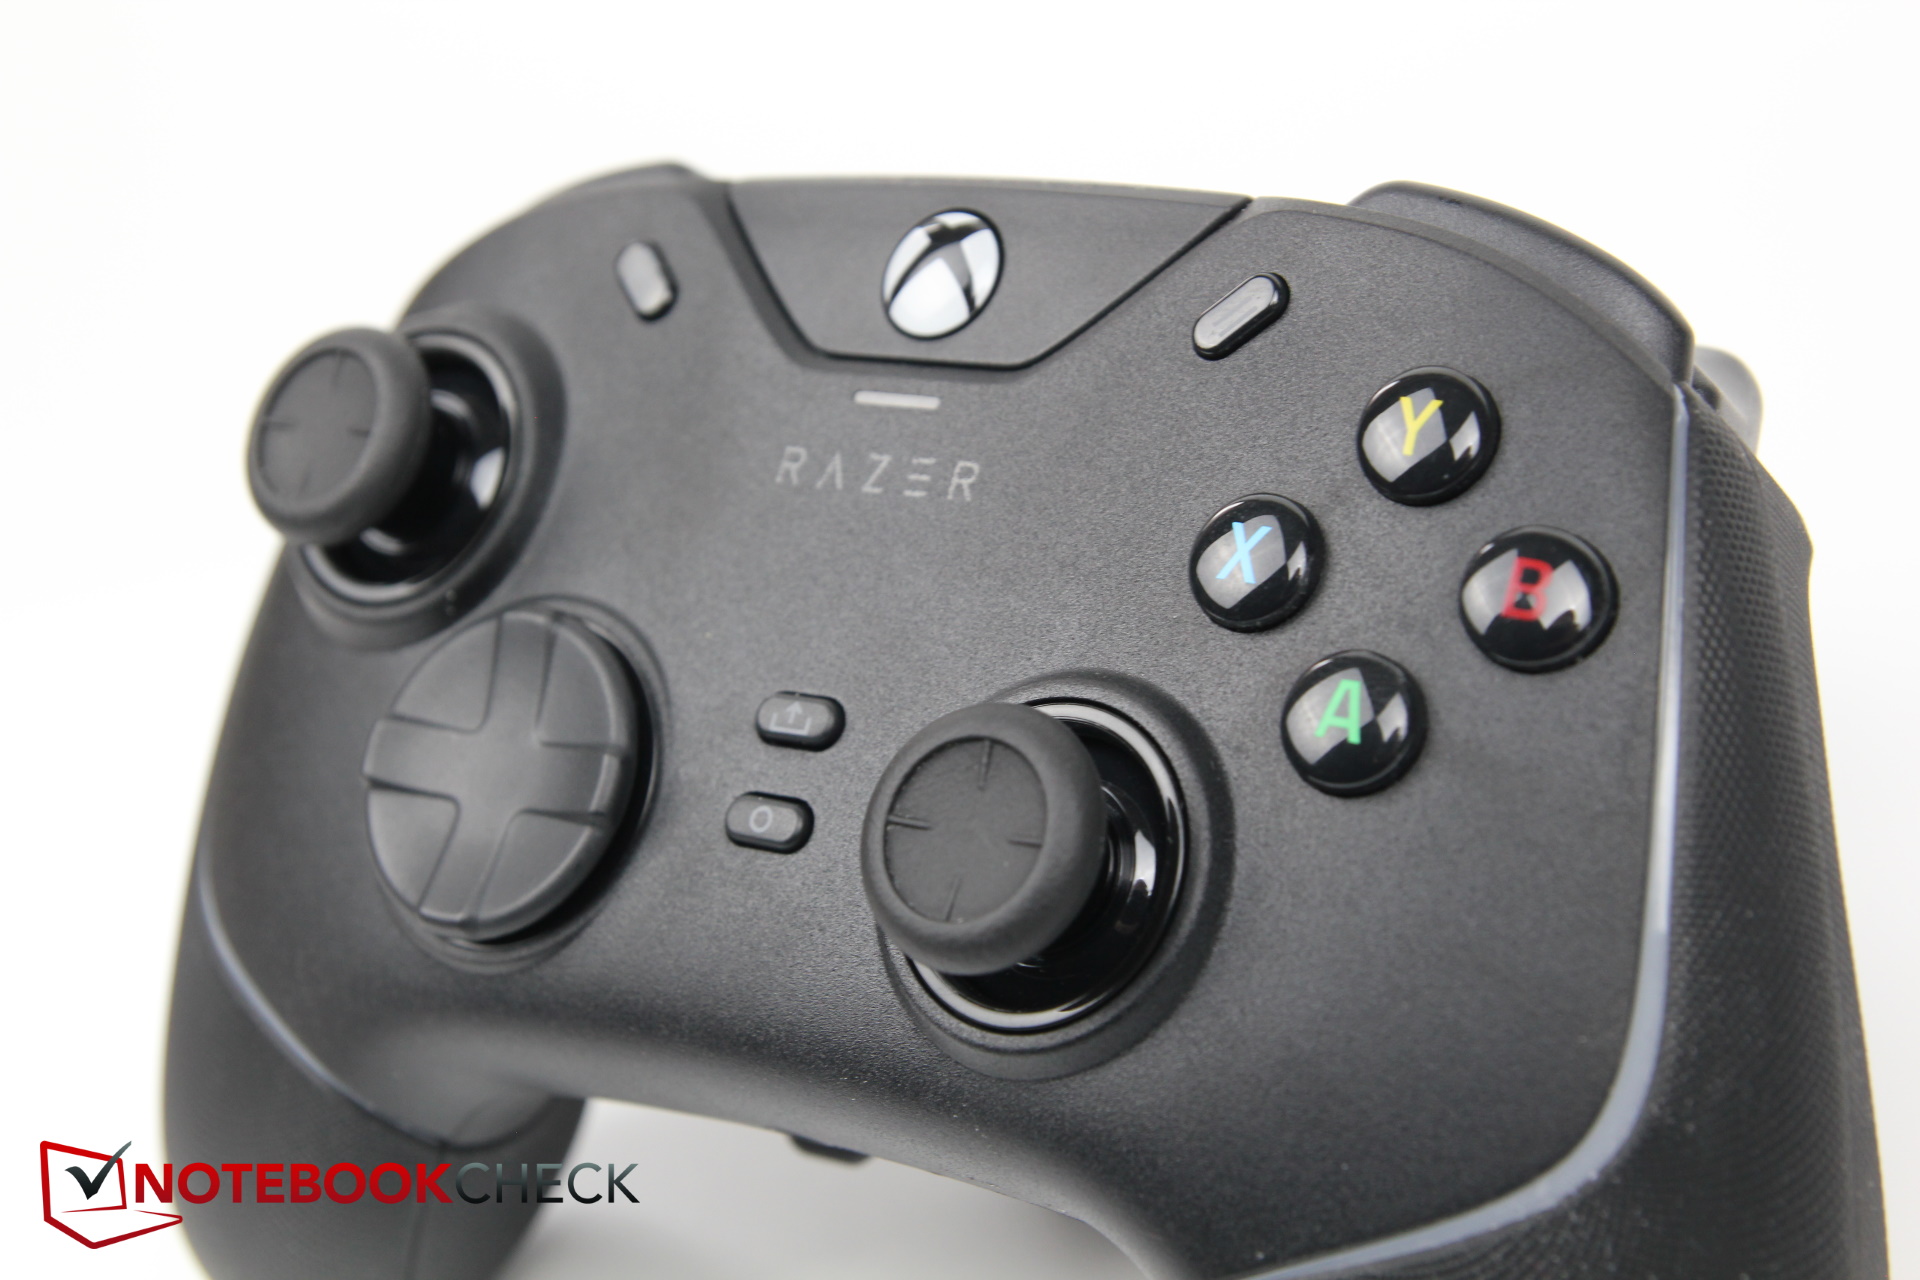 Ant Right enemy Razer Wolverine V2 Chroma hands-on: Extravagant gamepad with mechanical  buttons - NotebookCheck.net Reviews